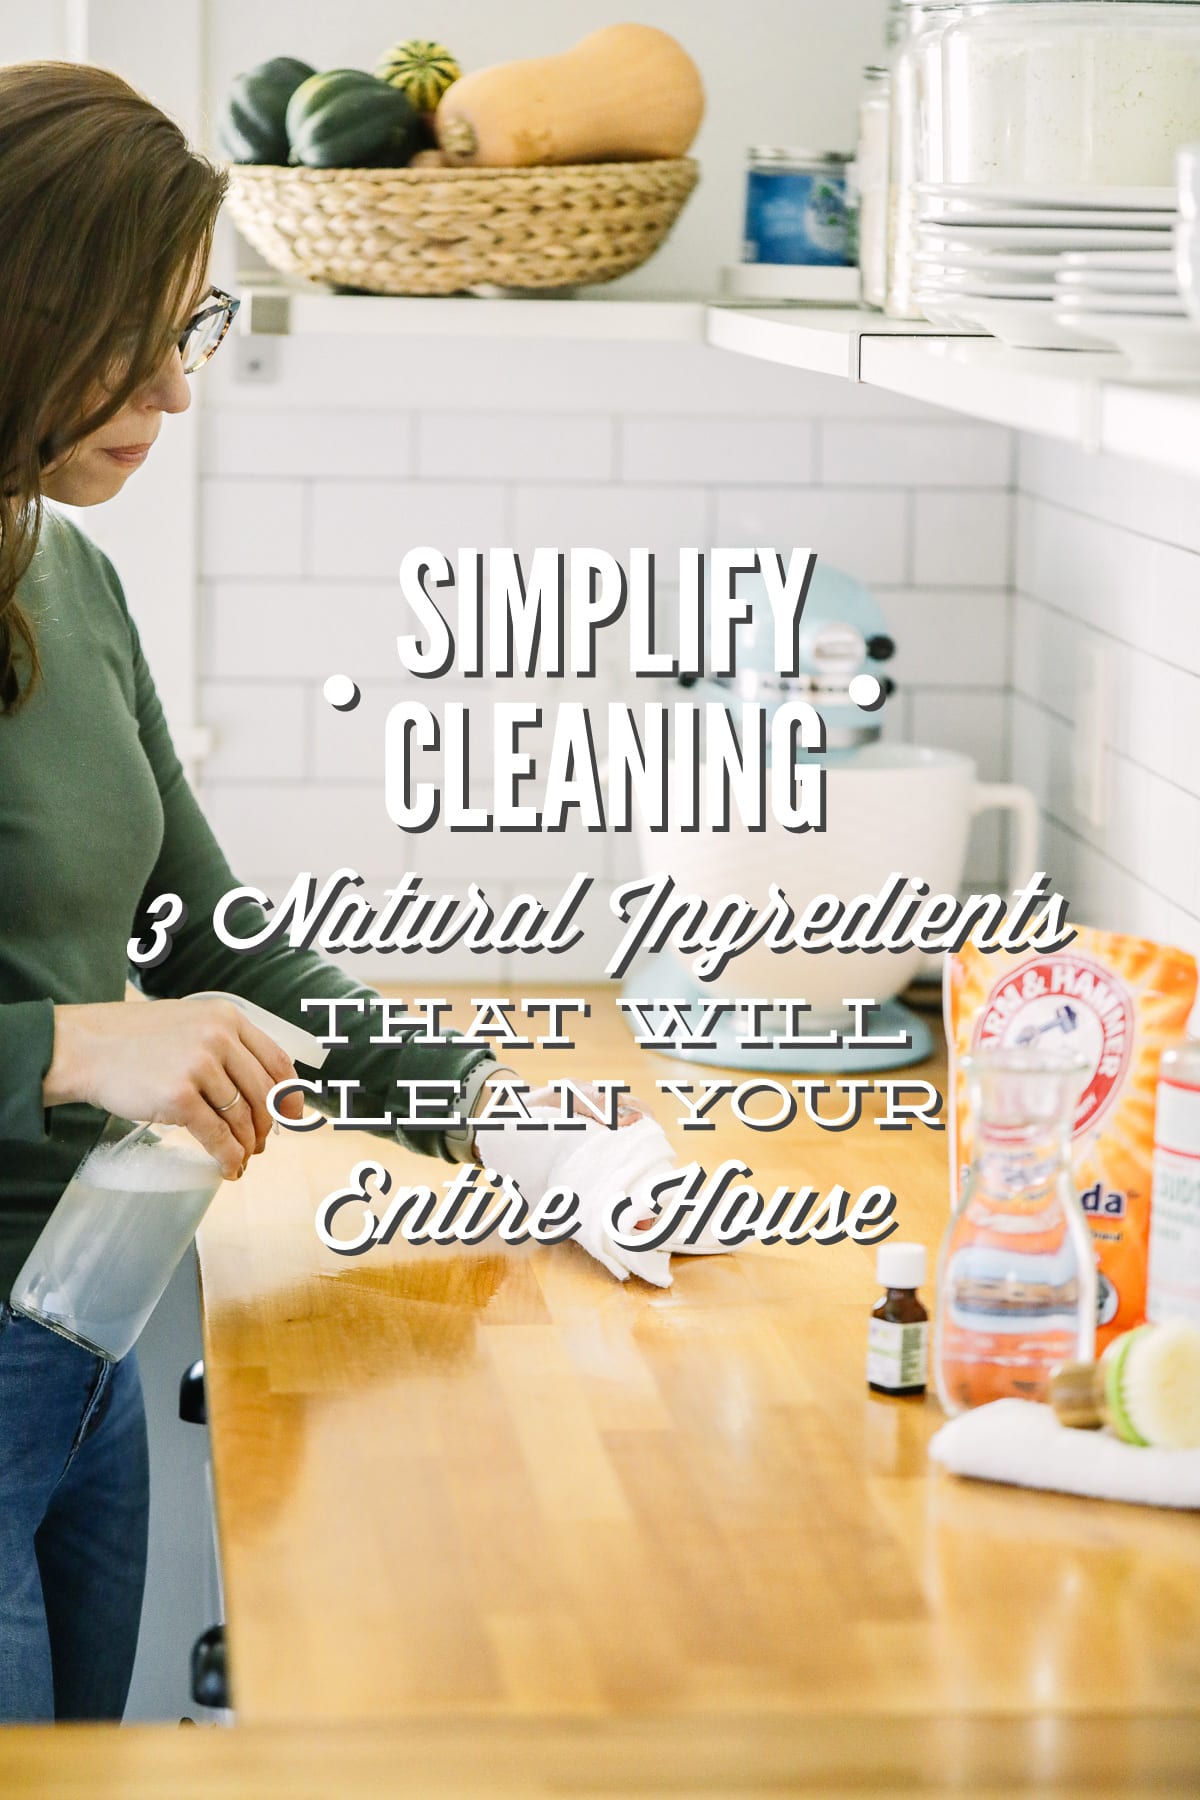 Simplify Cleaning: 3 Natural Ingredients That Will Clean Your Entire Home